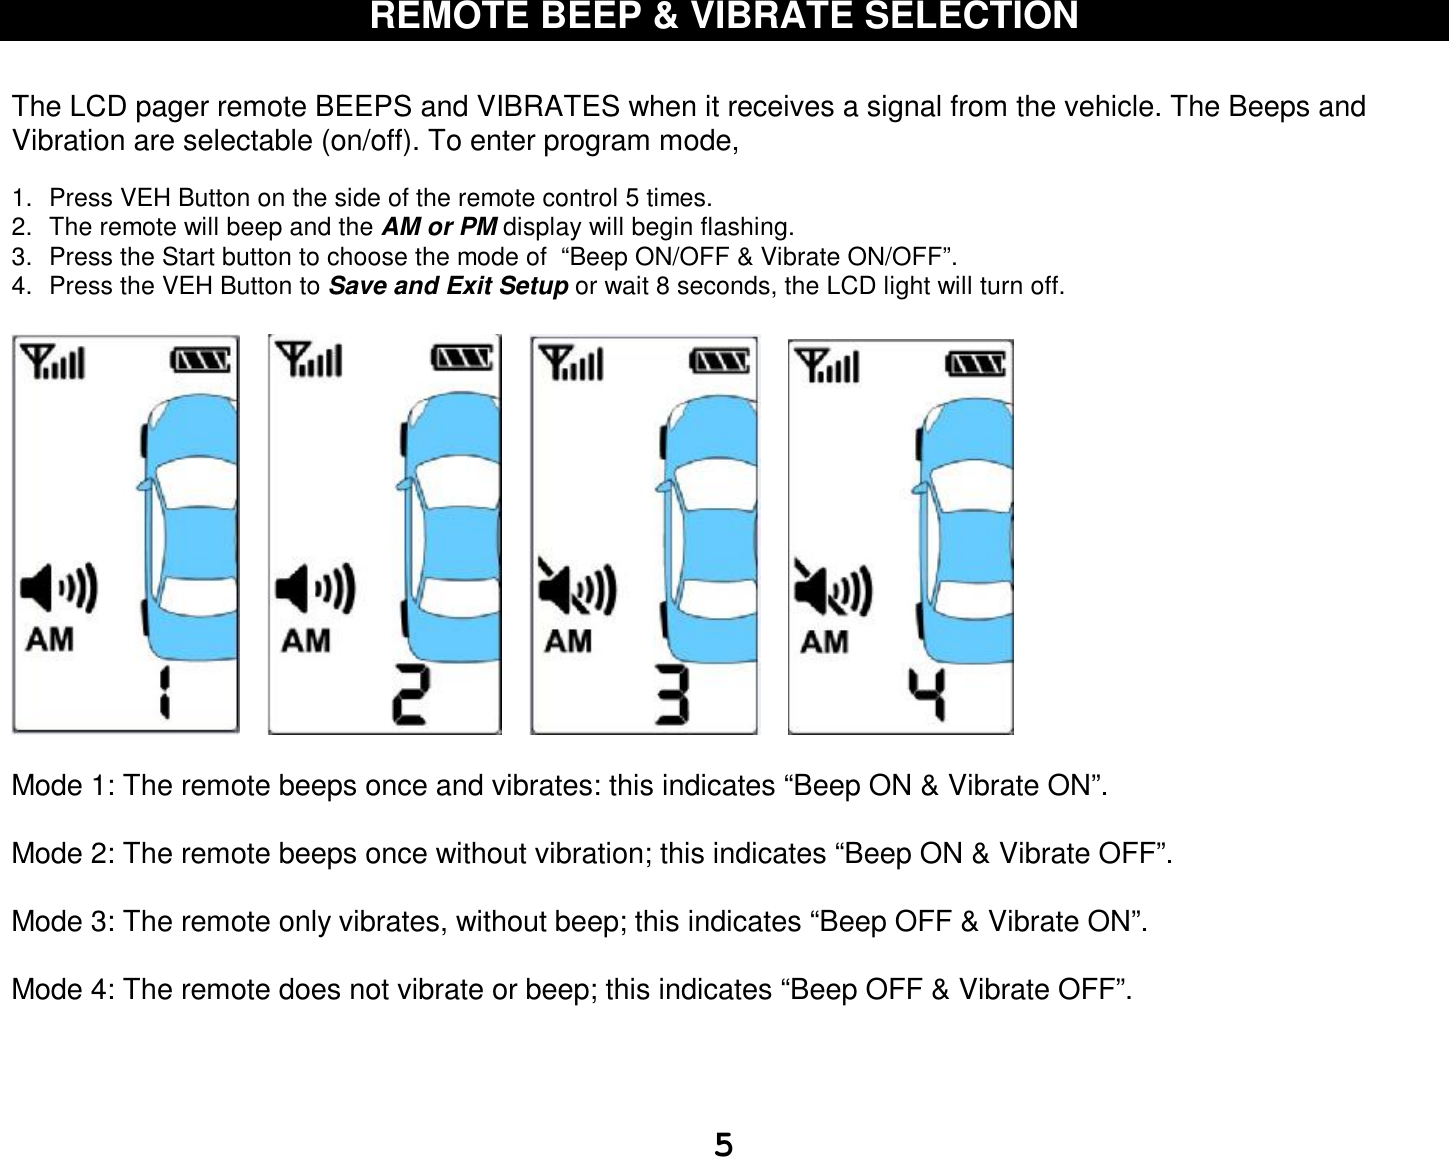  5 REMOTE BEEP &amp; VIBRATE SELECTION   The LCD pager remote BEEPS and VIBRATES when it receives a signal from the vehicle. The Beeps and Vibration are selectable (on/off). To enter program mode,  1. Press VEH Button on the side of the remote control 5 times. 2. The remote will beep and the AM or PM display will begin flashing. 3. Press the Start button to choose the mode of  “Beep ON/OFF &amp; Vibrate ON/OFF”. 4. Press the VEH Button to Save and Exit Setup or wait 8 seconds, the LCD light will turn off.                   Mode 1: The remote beeps once and vibrates: this indicates “Beep ON &amp; Vibrate ON”.   Mode 2: The remote beeps once without vibration; this indicates “Beep ON &amp; Vibrate OFF”.   Mode 3: The remote only vibrates, without beep; this indicates “Beep OFF &amp; Vibrate ON”.   Mode 4: The remote does not vibrate or beep; this indicates “Beep OFF &amp; Vibrate OFF”.     